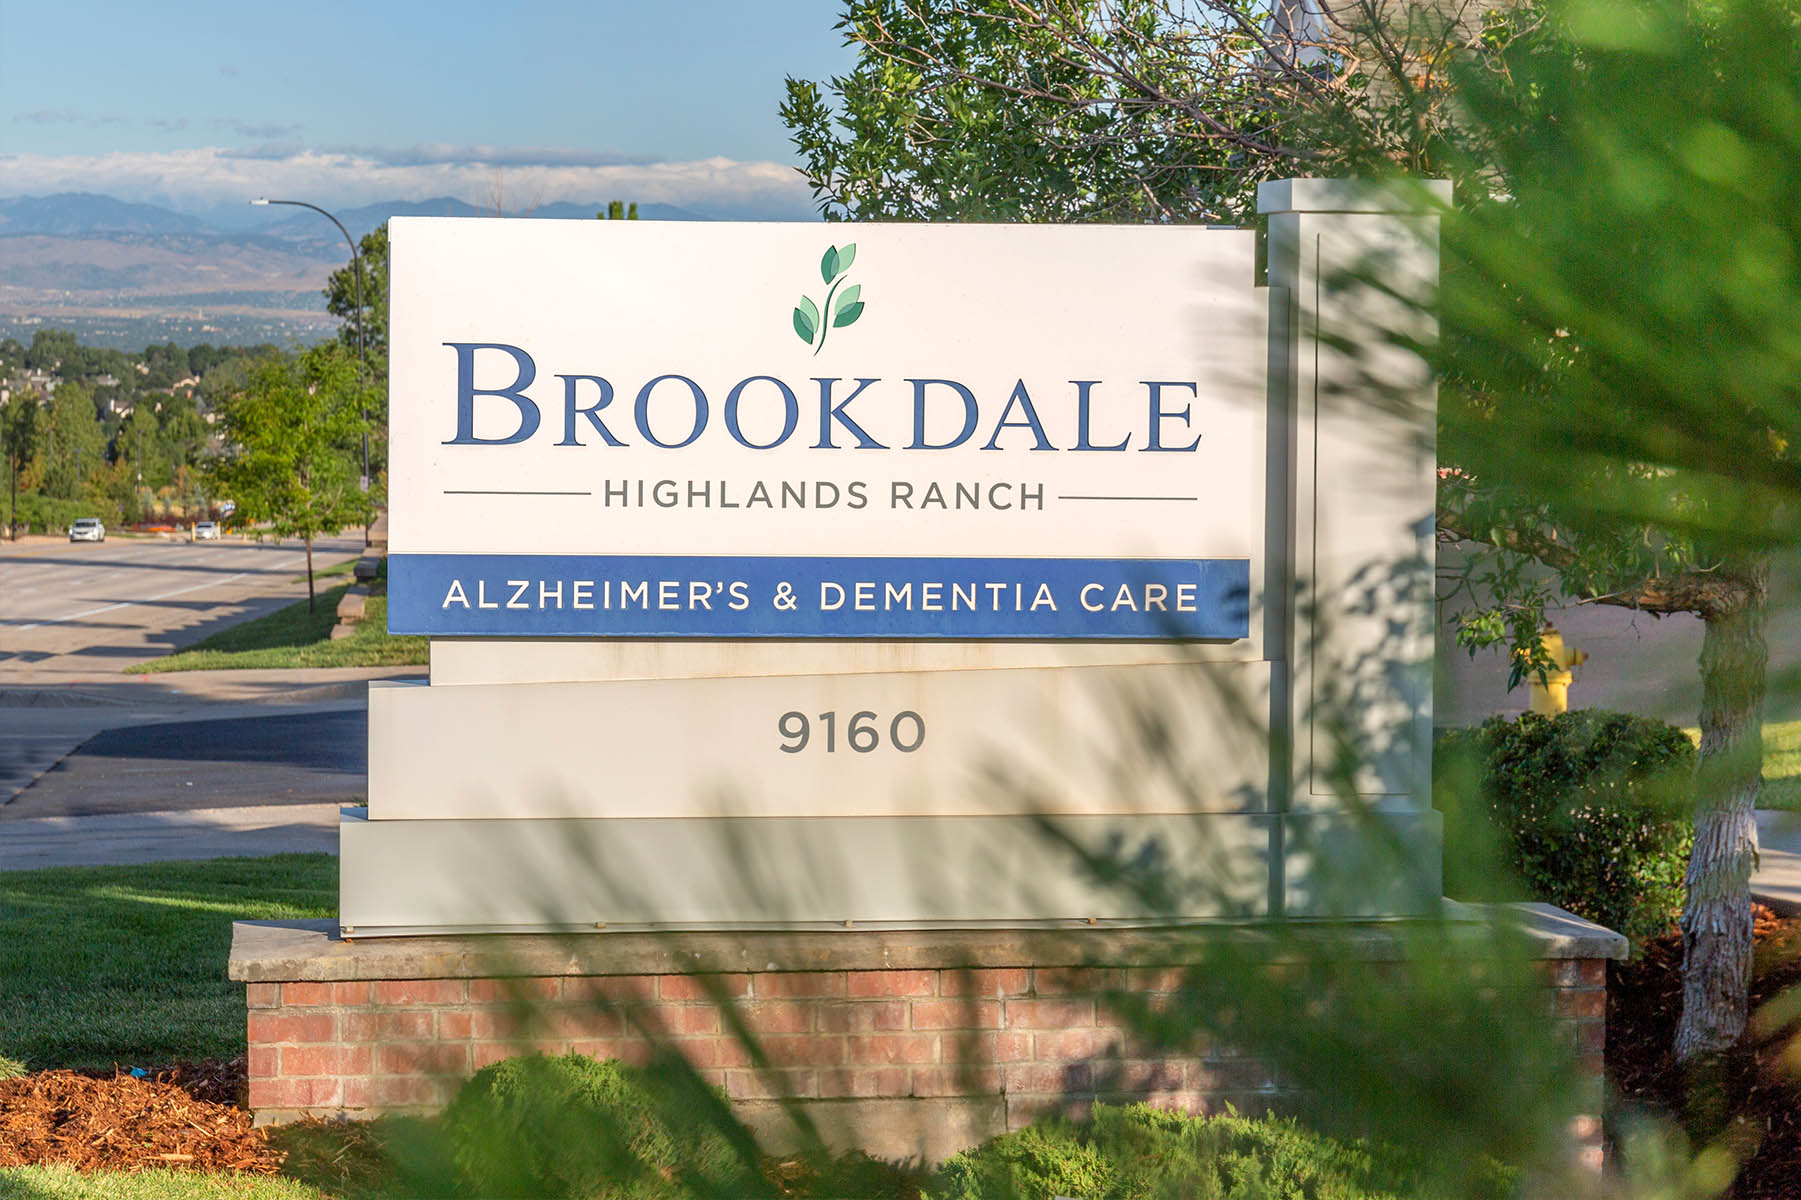 Brookdale Highlands Ranch - Alzheimer's and Dementia Care Sign